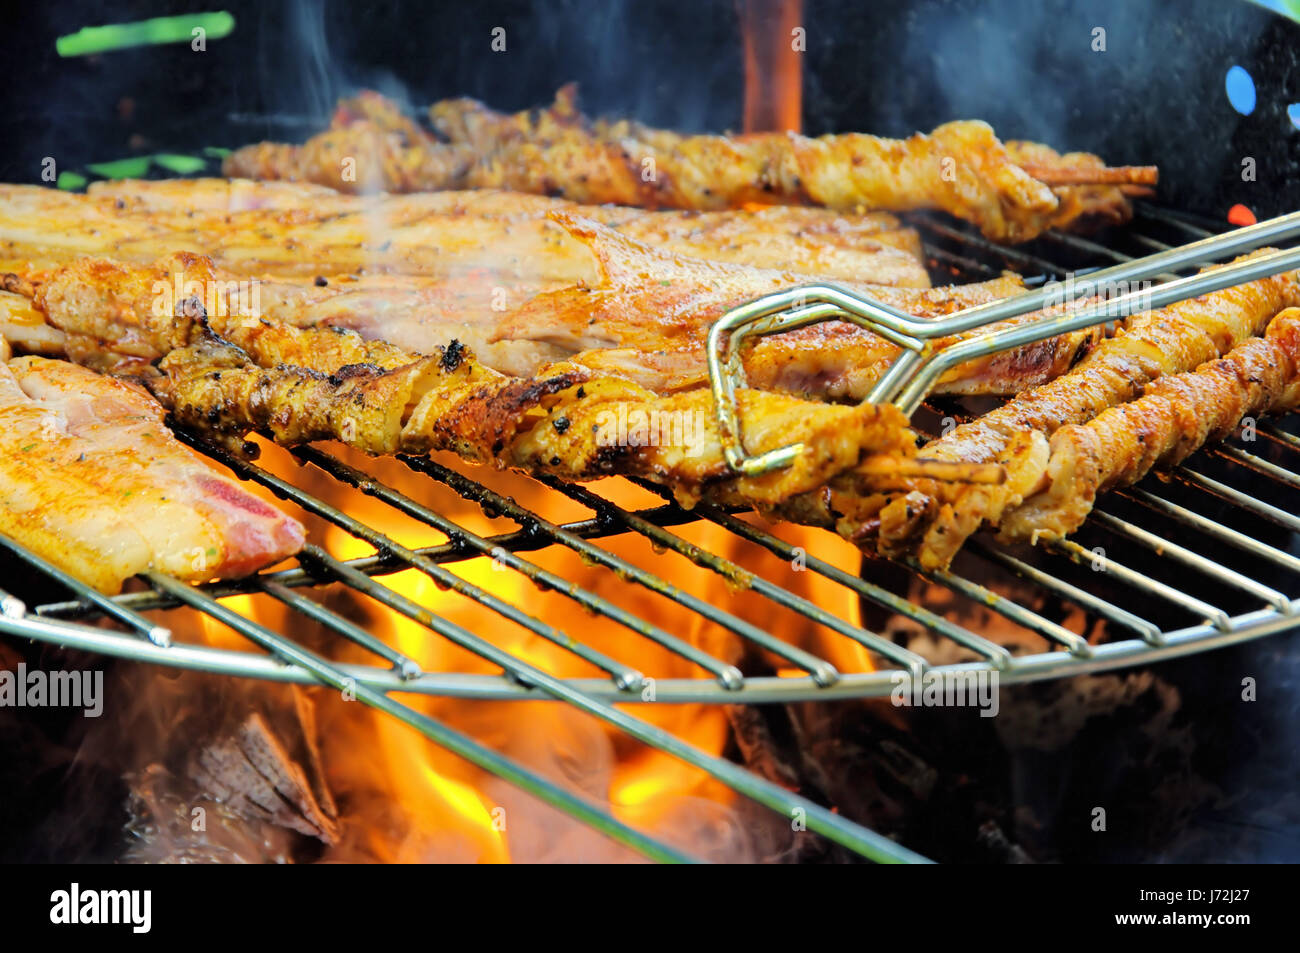 rust grill barbecue barbeque steak pig meat boil cooks boiling cooking outside Stock Photo